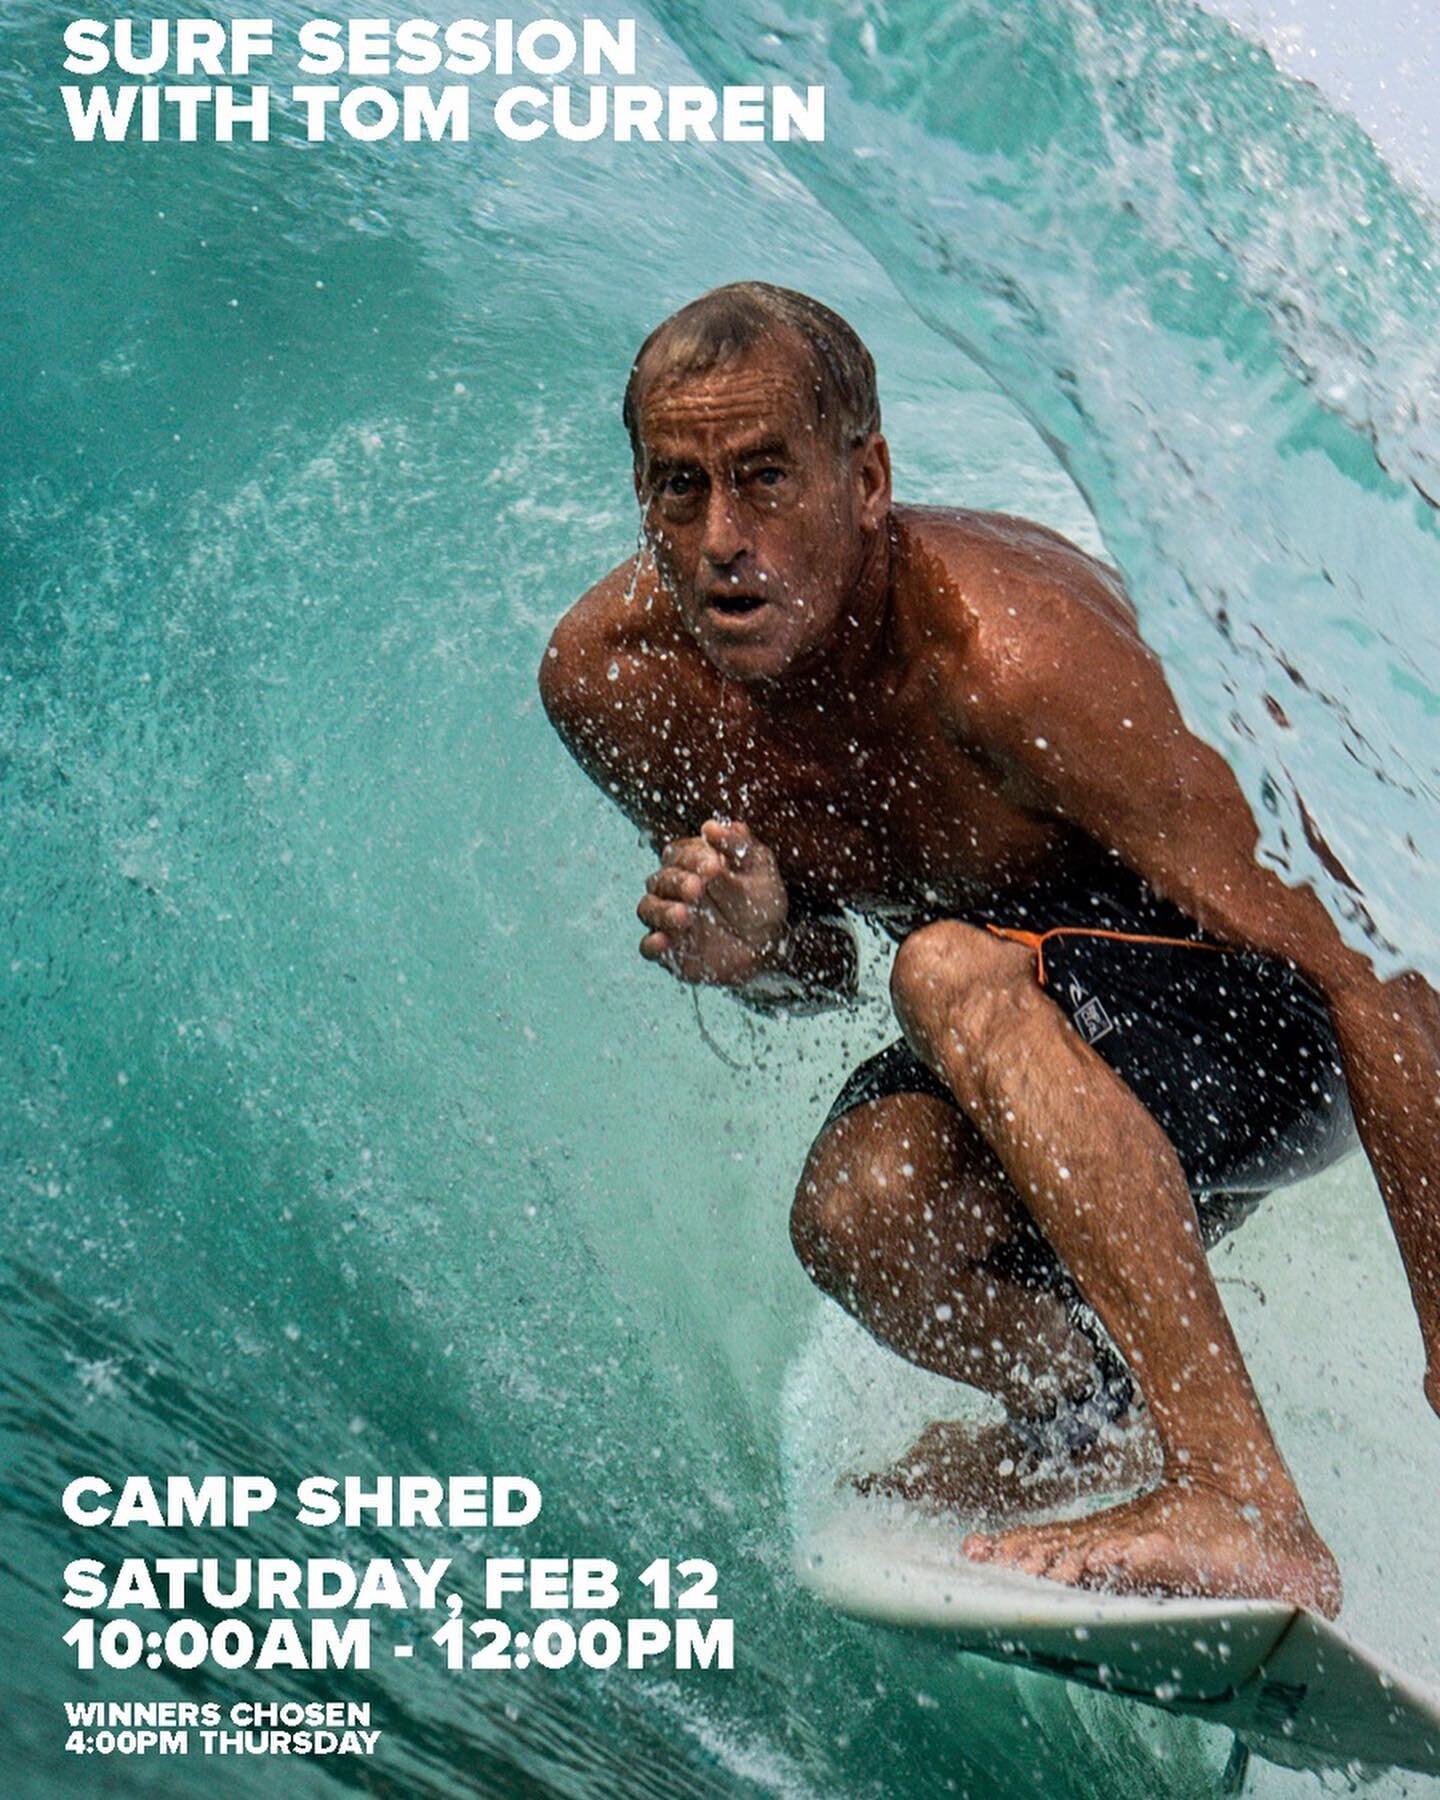 In case you needed ANOTHER reason &hellip; @ripcurl_usa is giving away a surf session with legend Tom Curren Saturday Feb 12th, from 10-12pm. Stop by their booth &amp; sign up!! #campshred #tomcurren #sandiego #socalevents #surfindustry